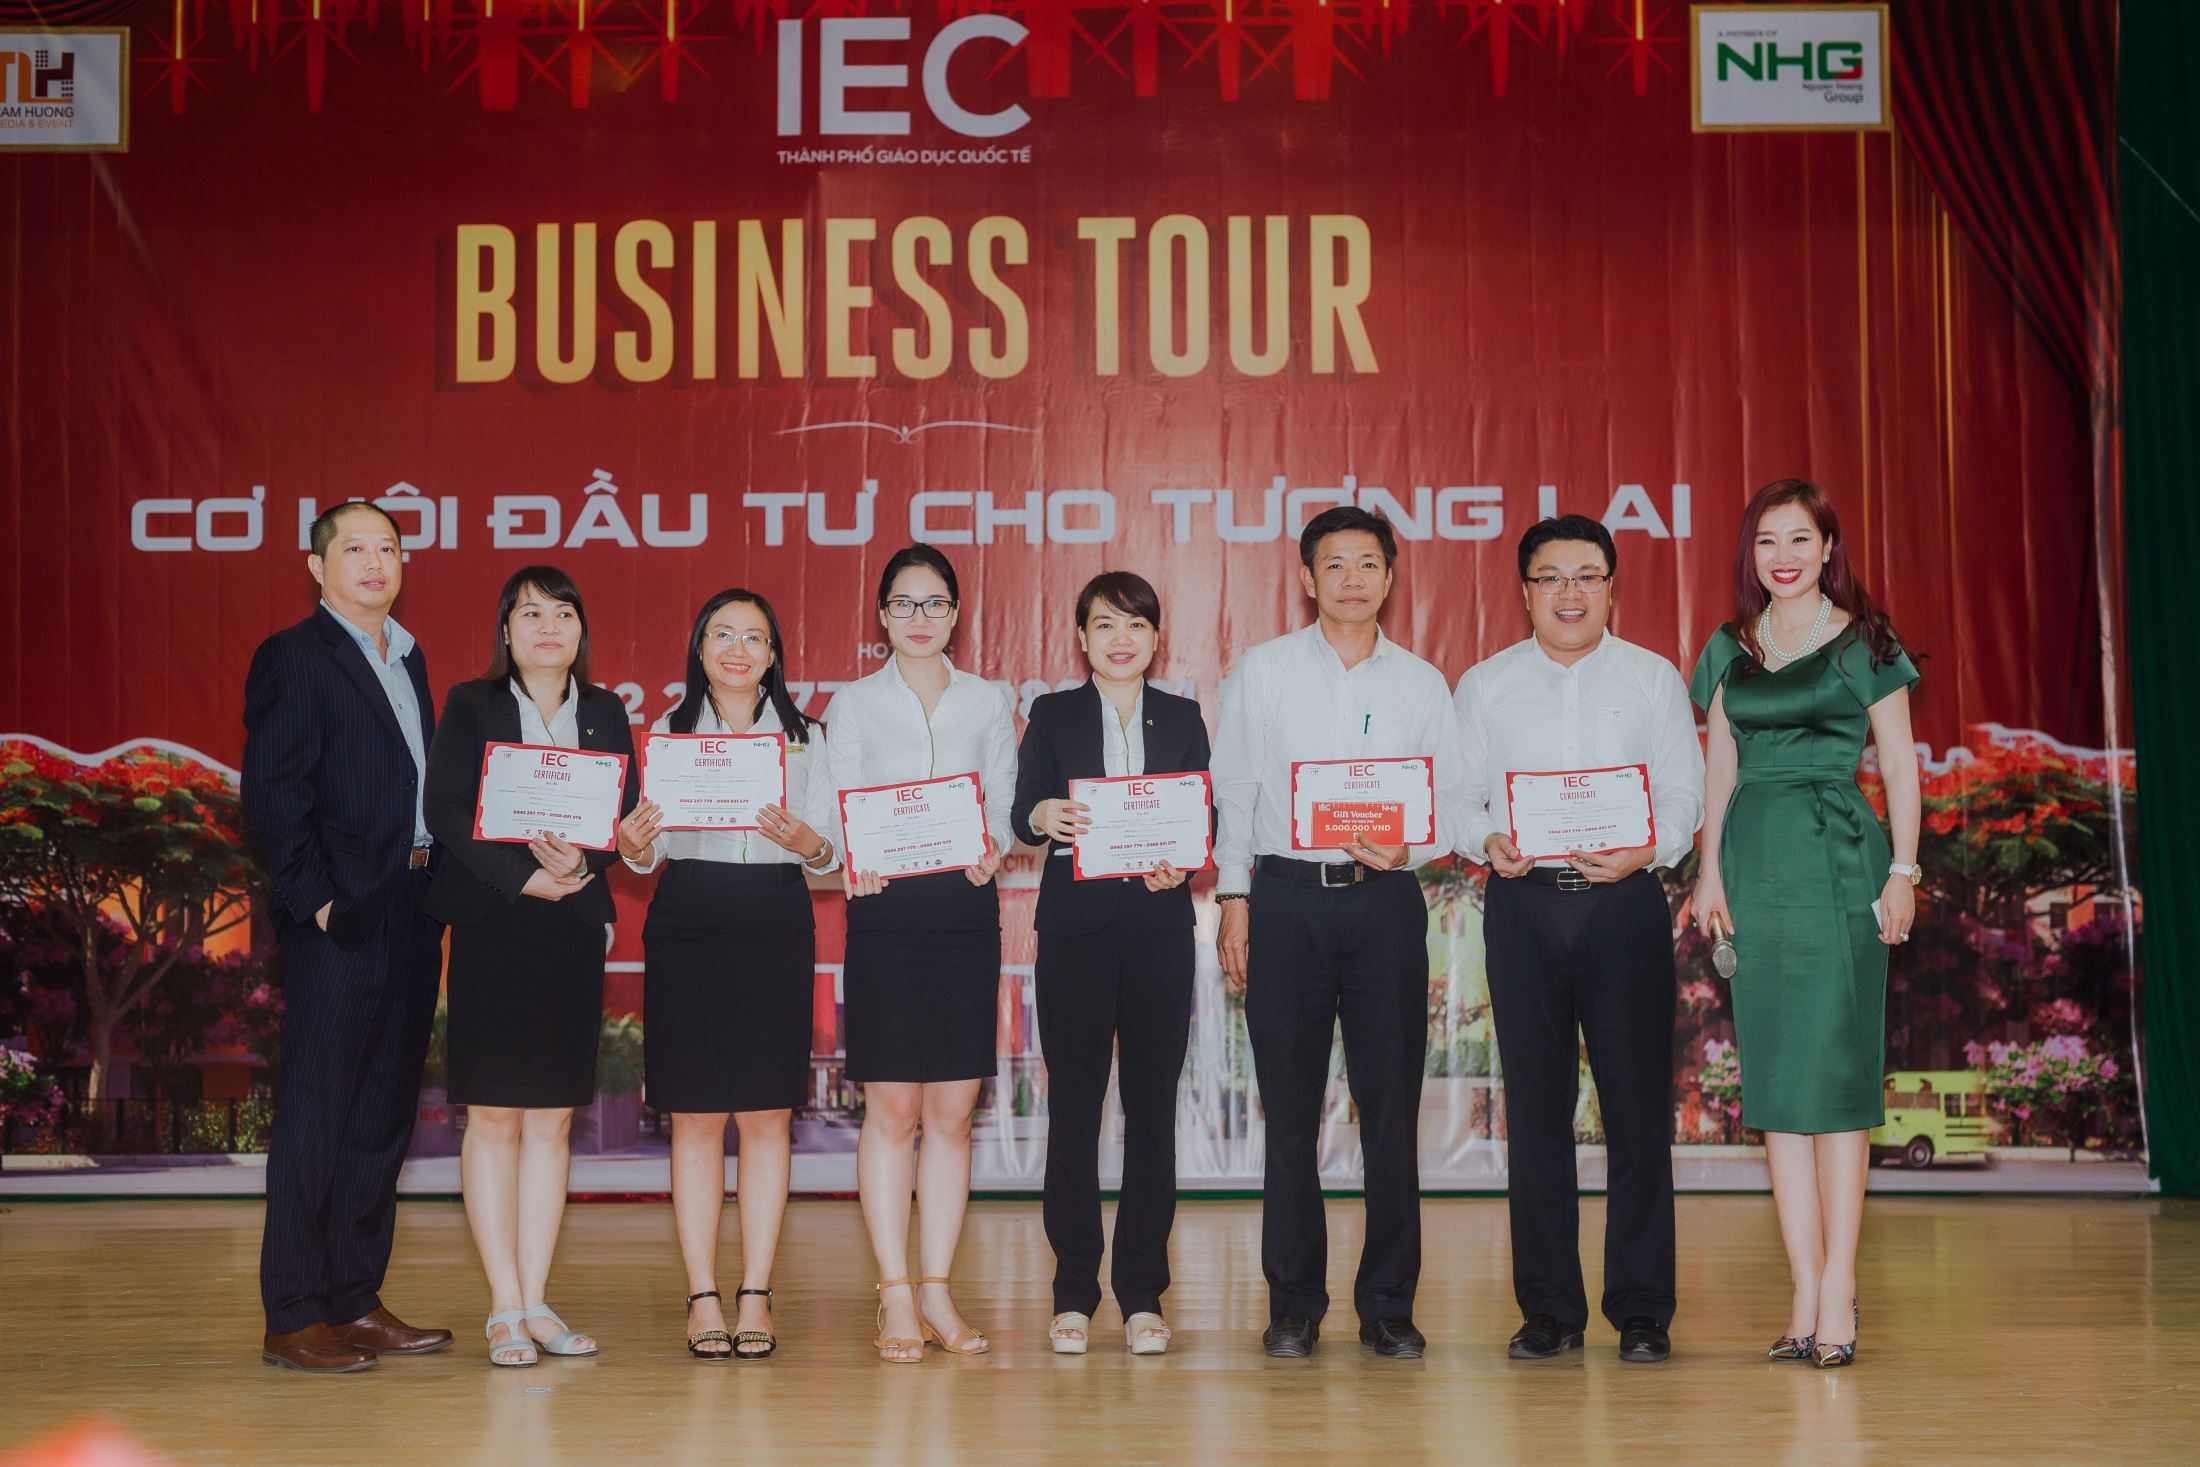 Parents of Vietcombank Quang Ngai registered the tuition investment package